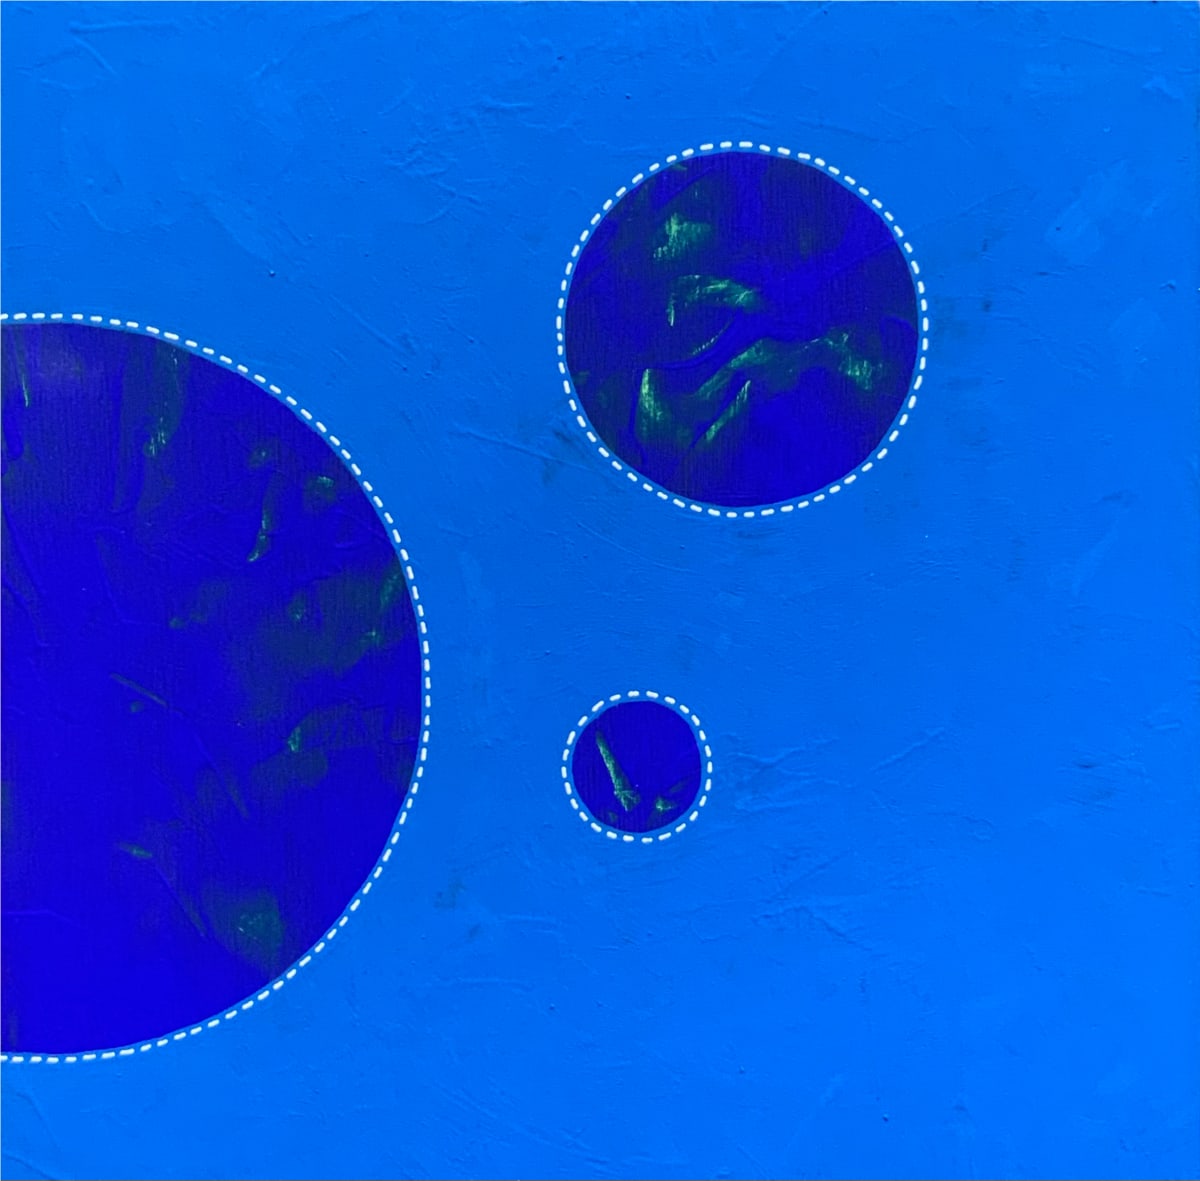 Dots 52, Blue + Royal Texture by Suzanne Gibbs  Image: Dots 52, Blue + Royal Texture Painting